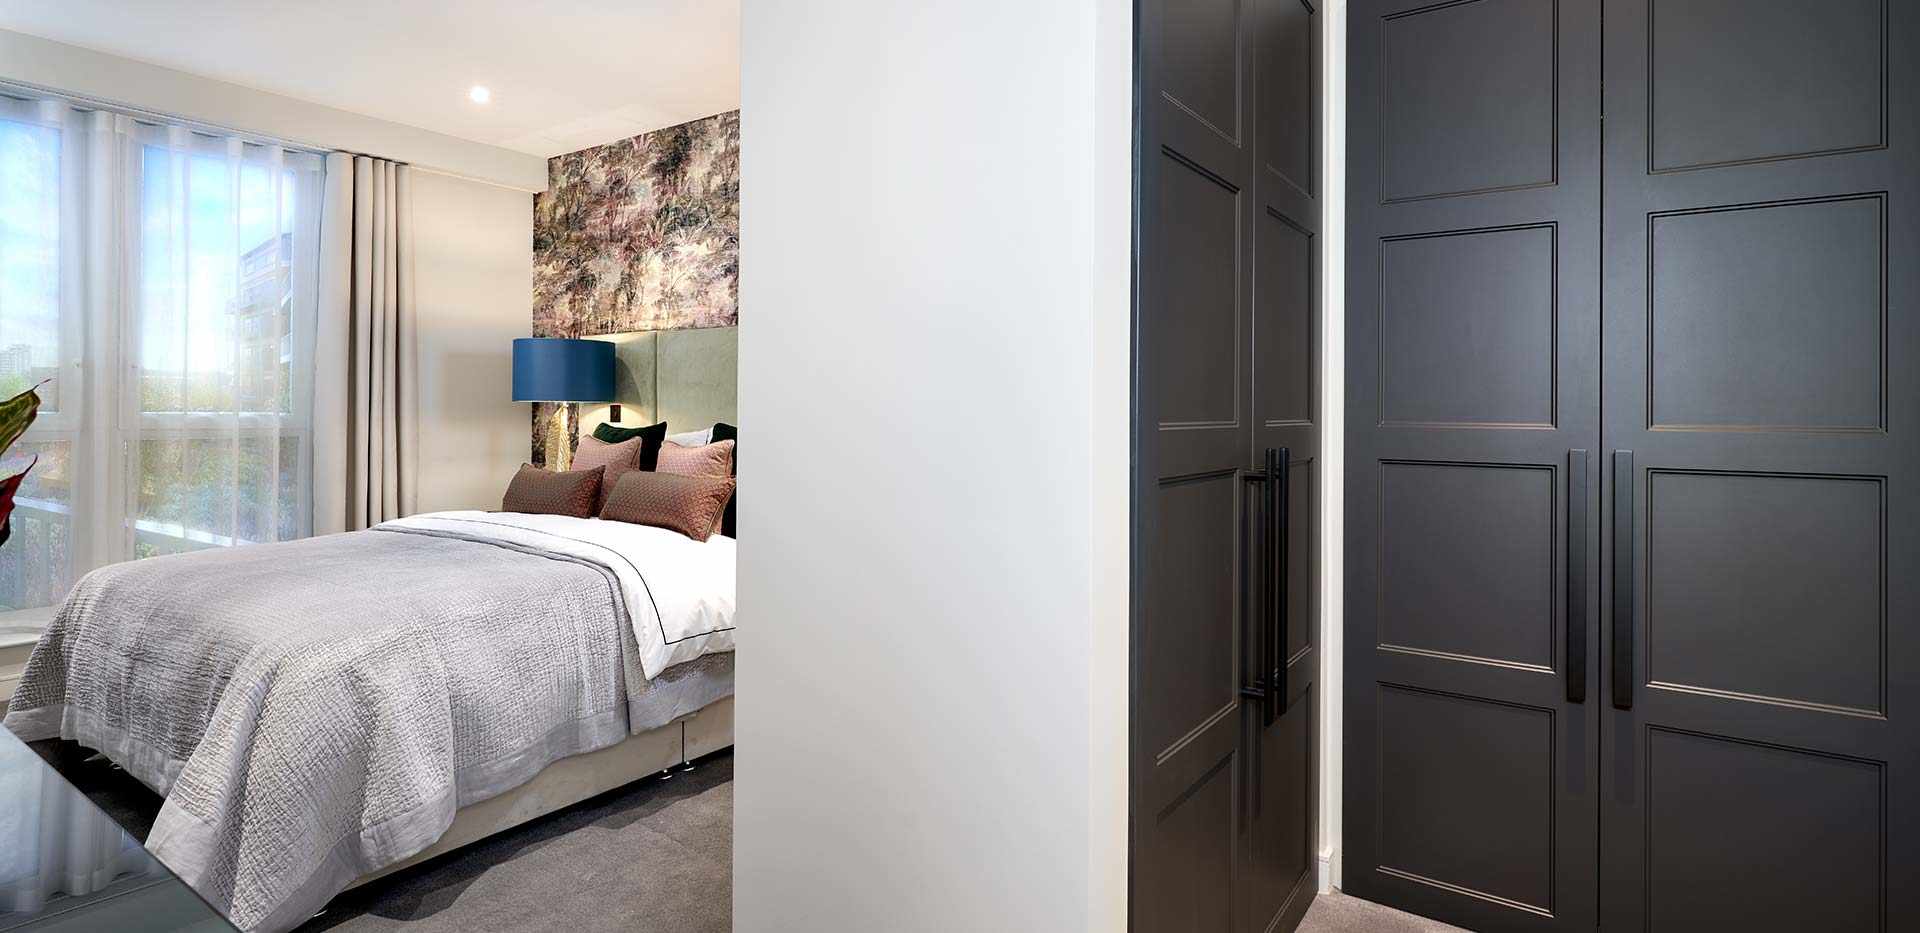 St George, Royal Exchange, Show Apartment, Bedroom with Wardrobe